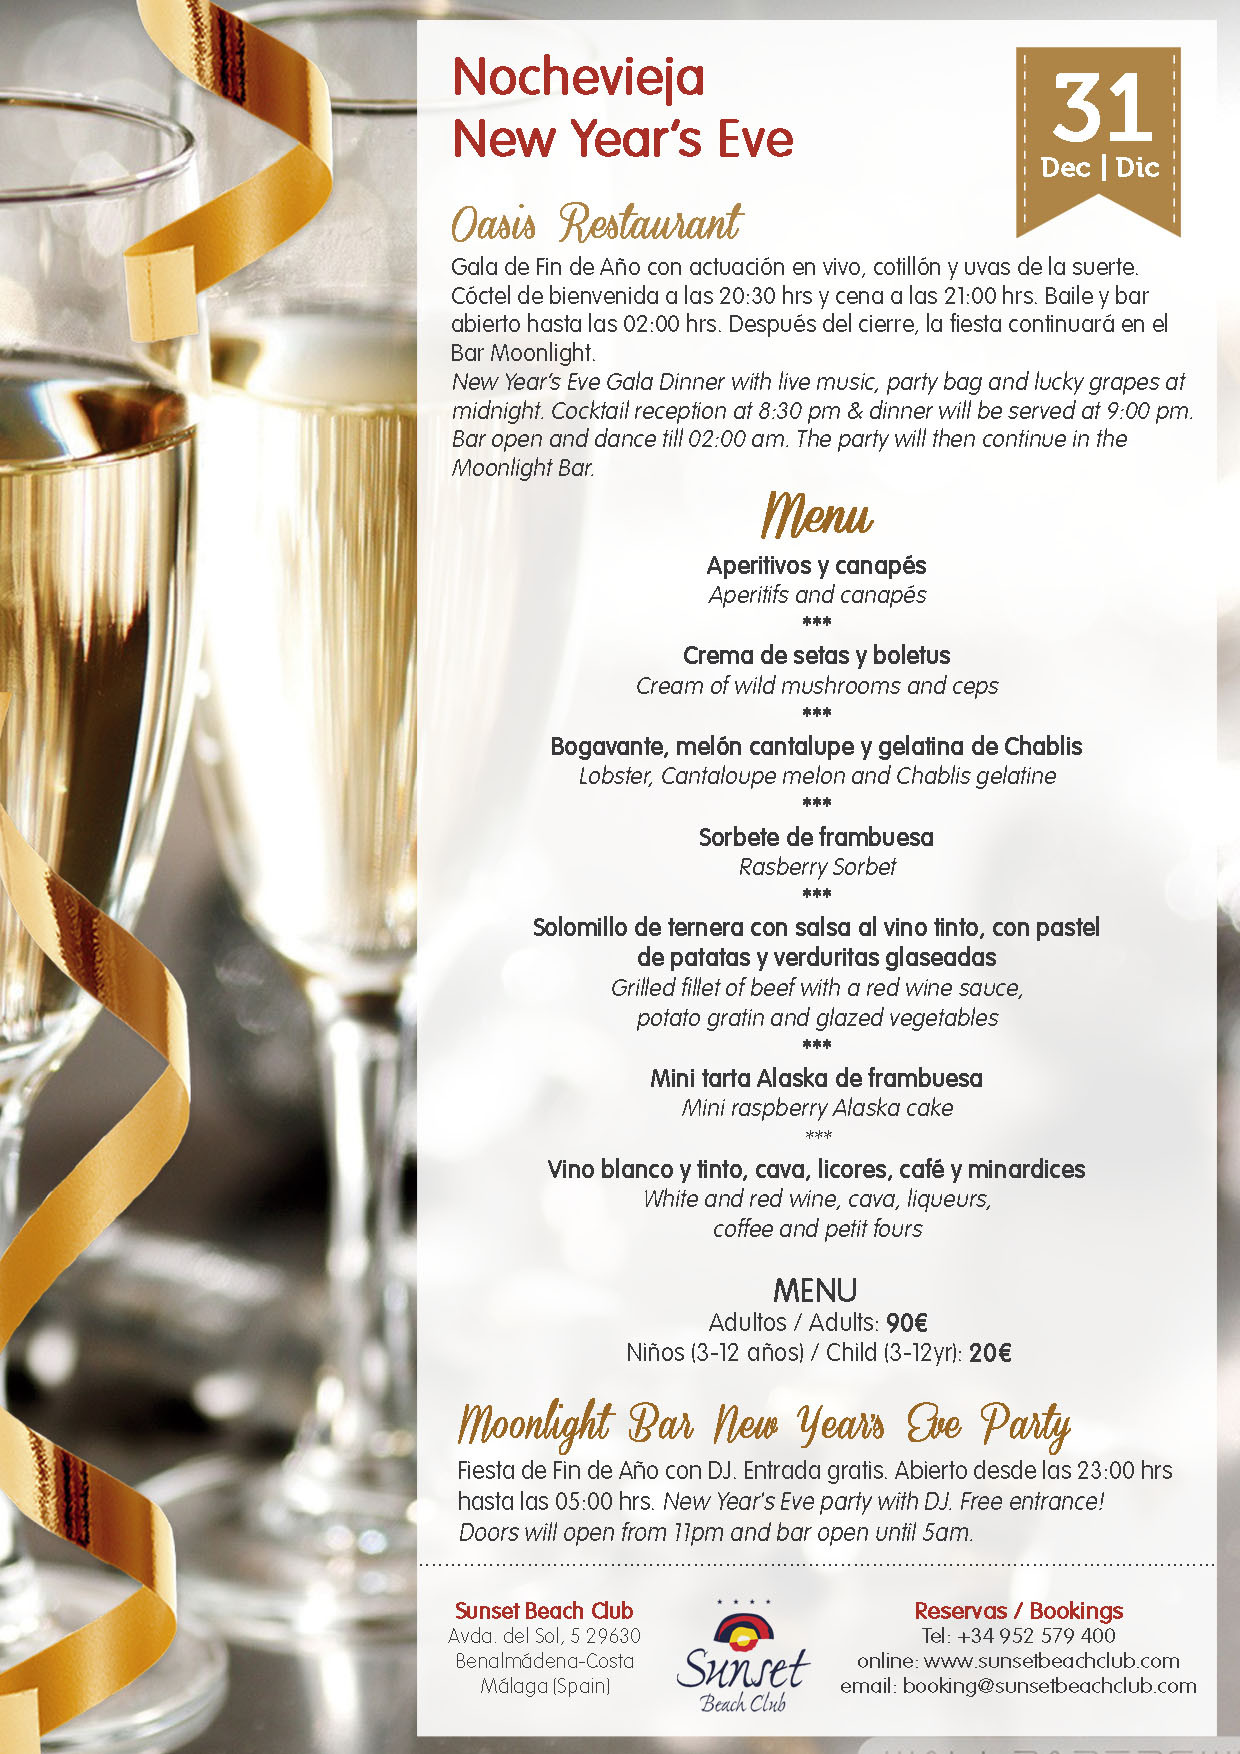 New Years Eve Dinner Party Menu
 Winter Sun Breaks Over 50 s